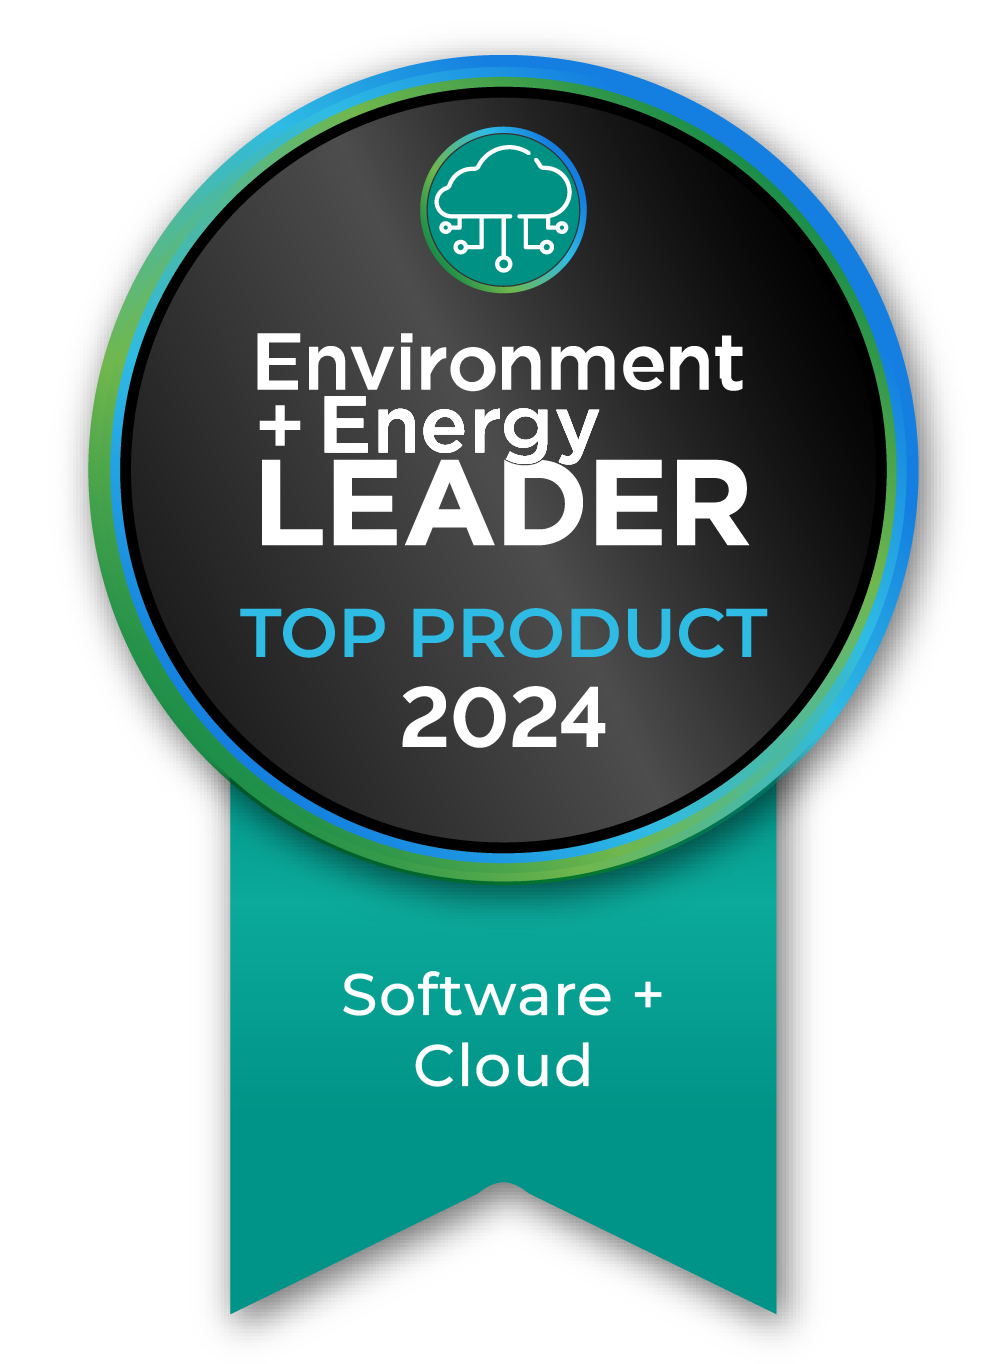 Environmental and Energy Leader Top Product Award